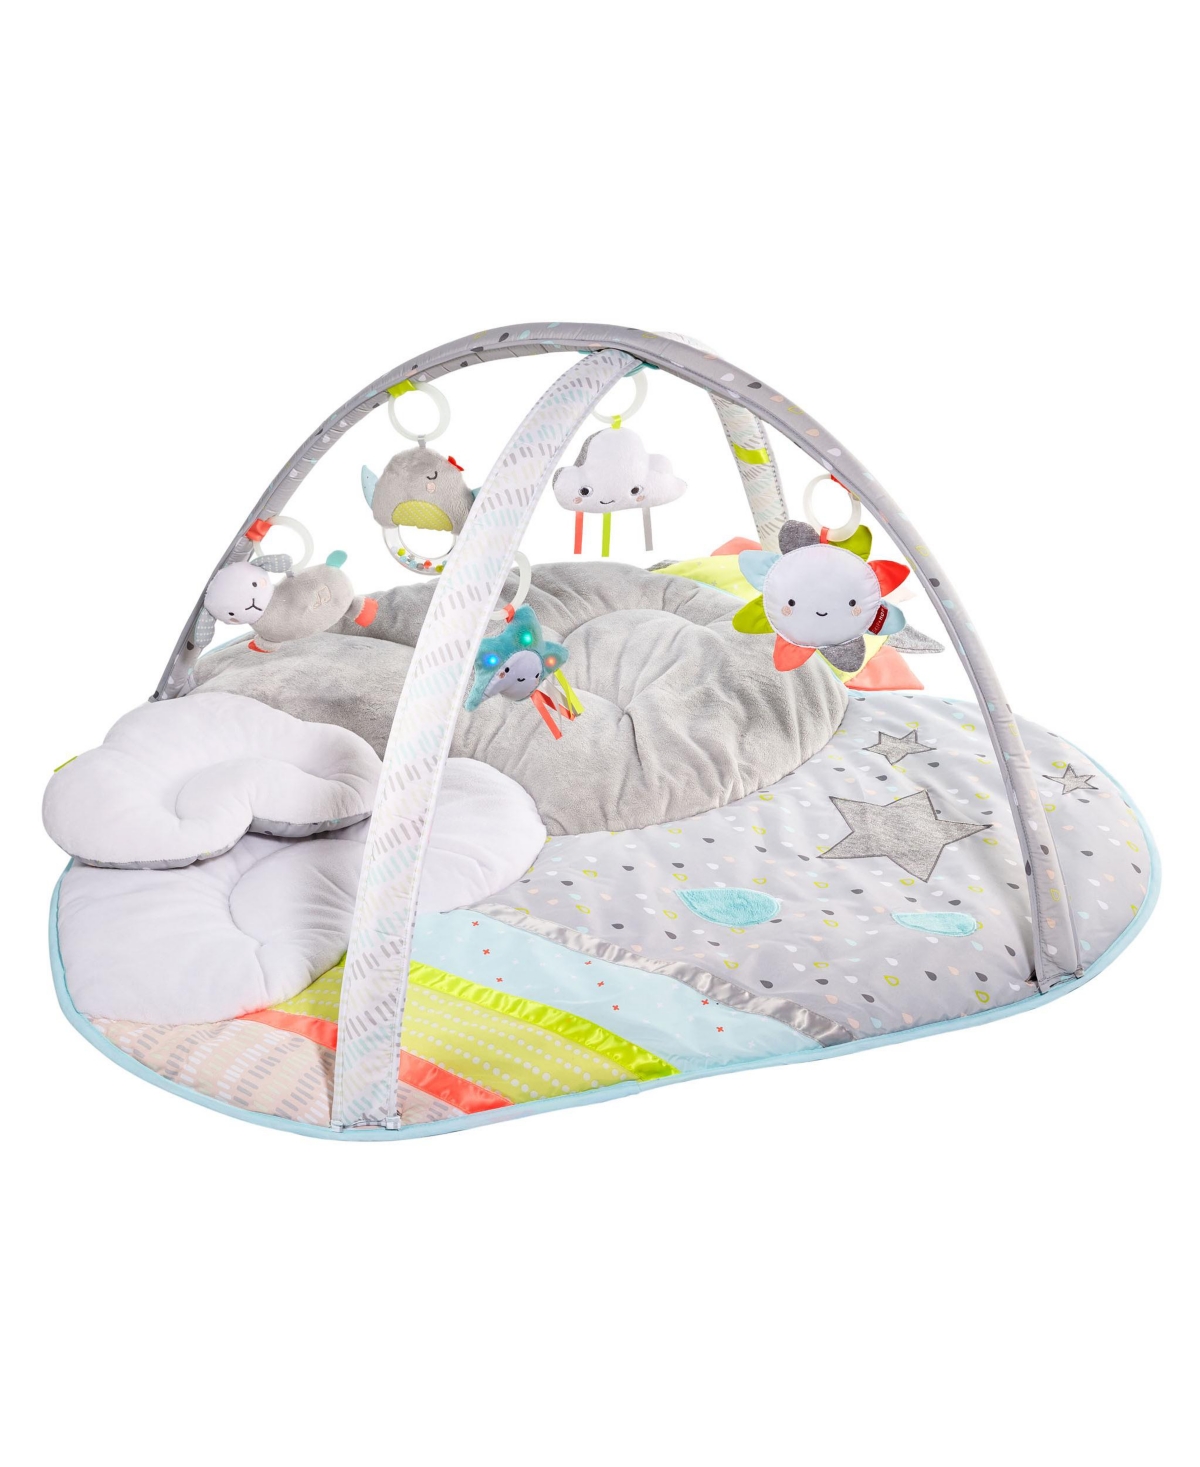 Skip Hop Silver Lining Cloud Activity Gym In Multi